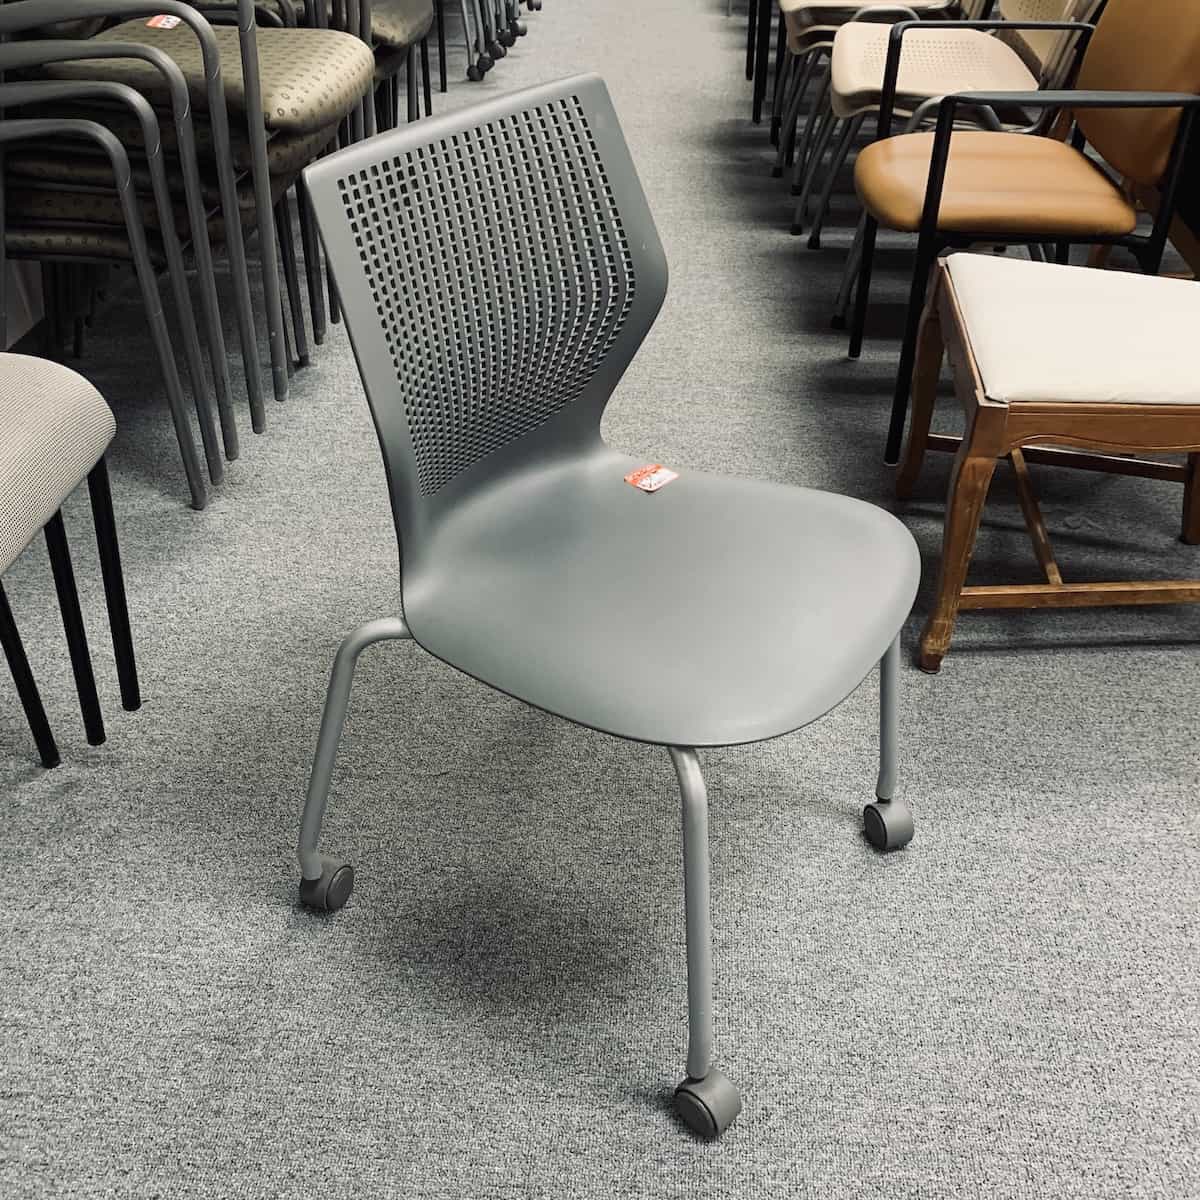 grey-plastic-stacking-chair-wheels